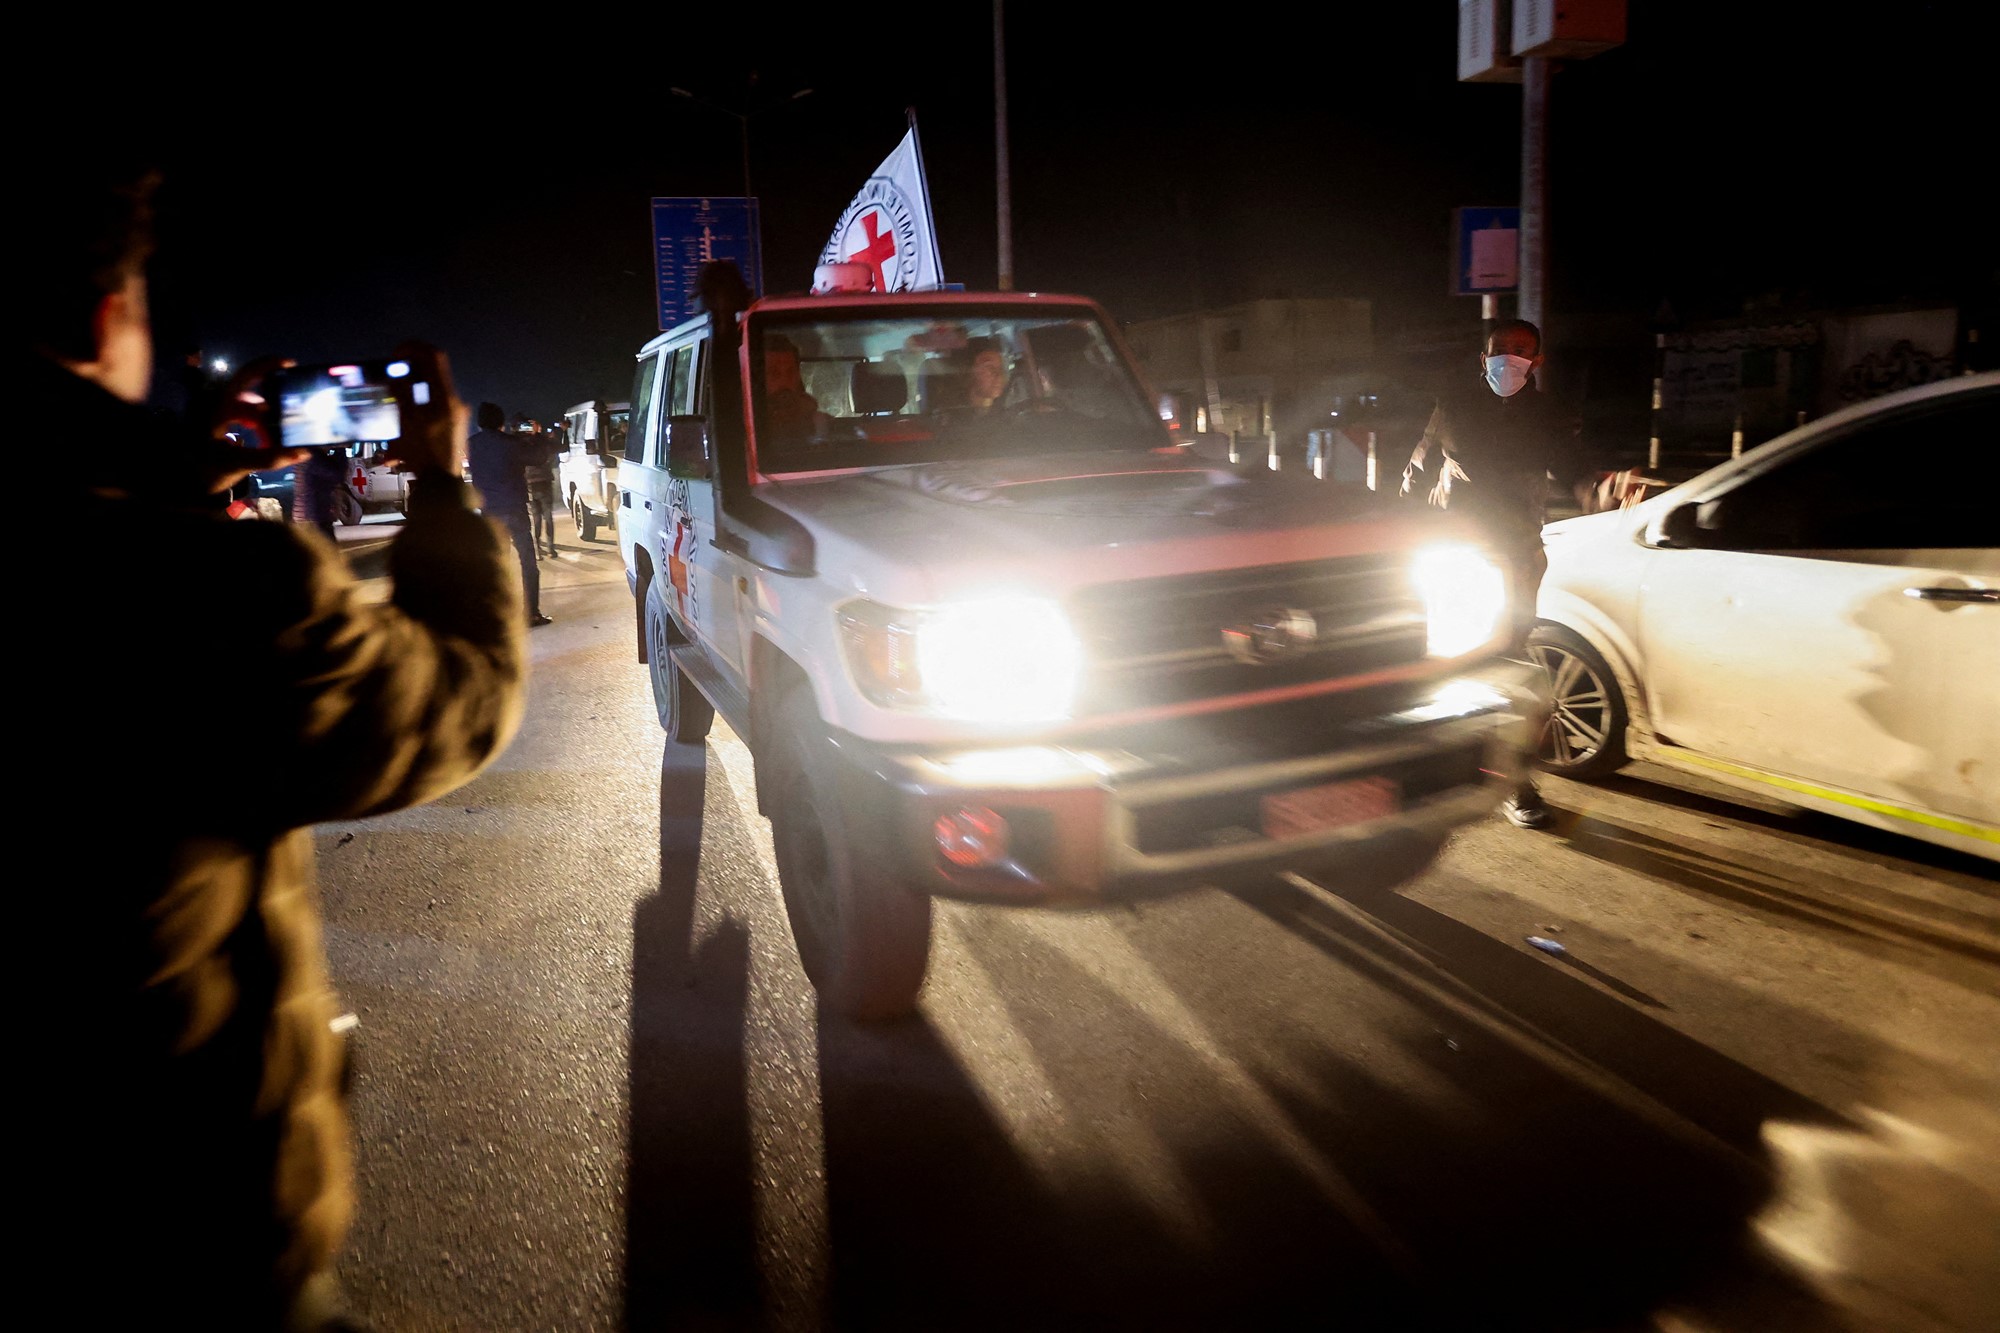 A red cross vehicle drives past photographers